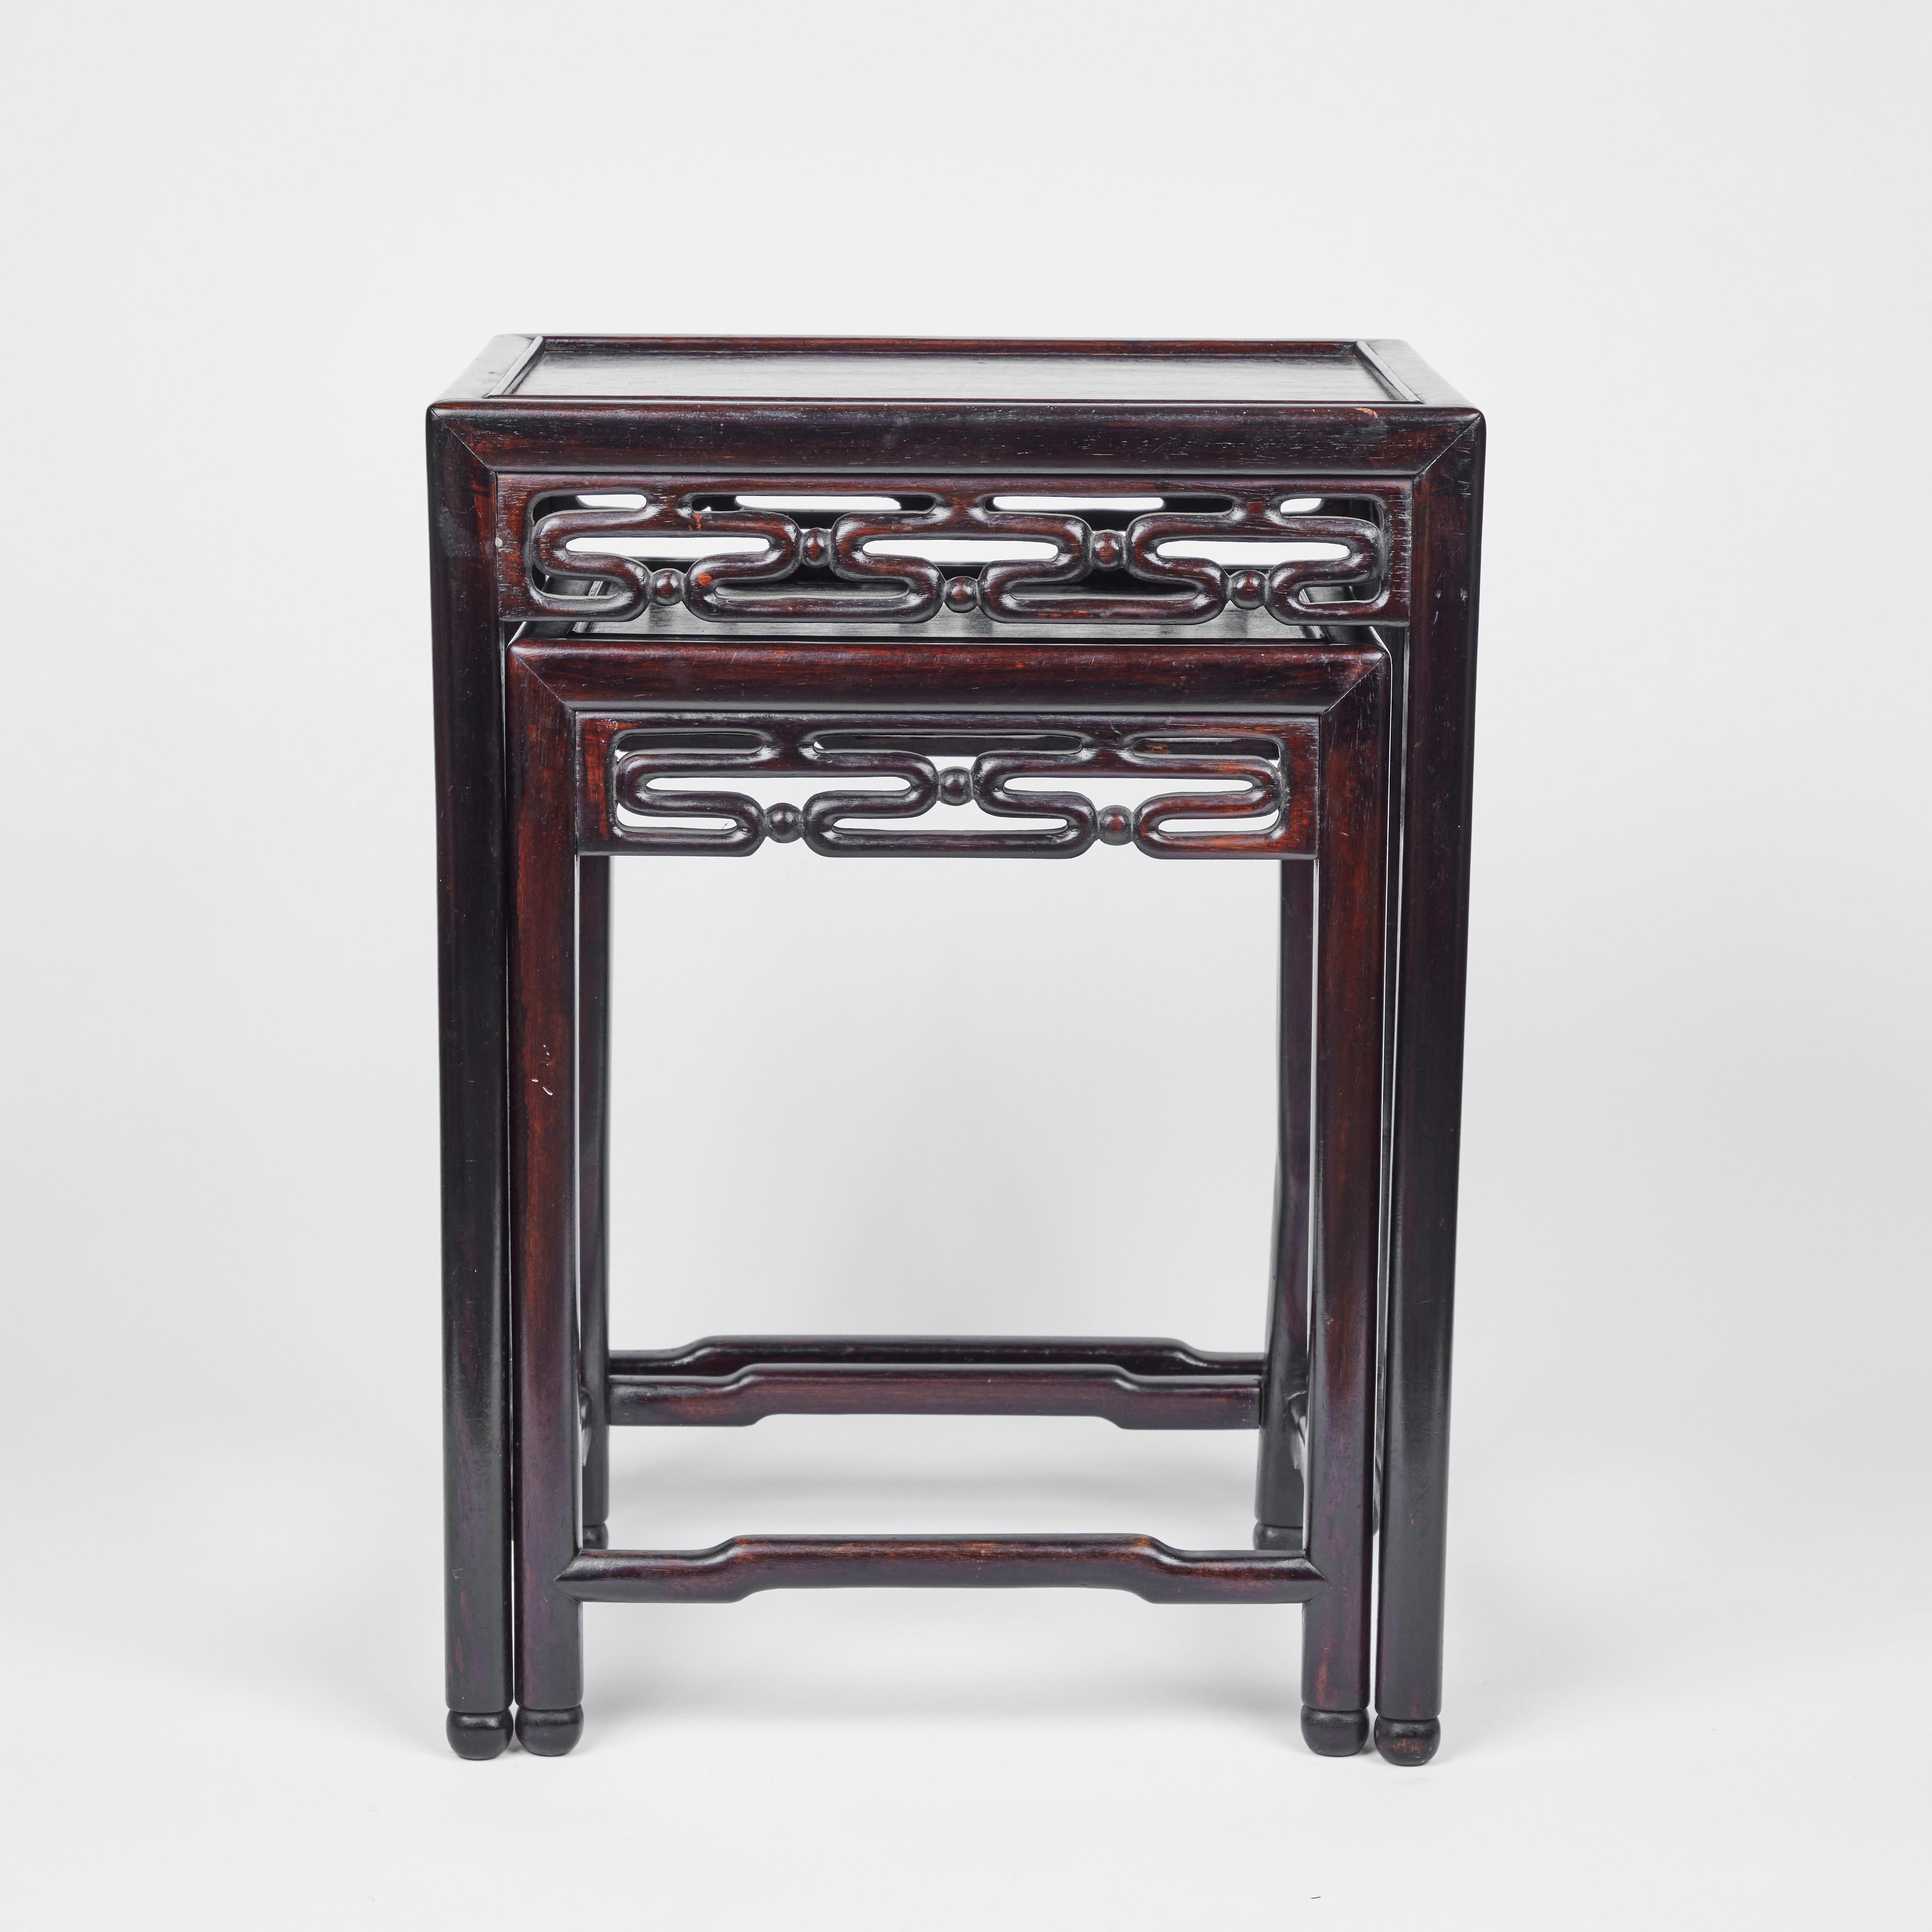 20th Century Vintage Wood Nesting Tables with Asian Motif